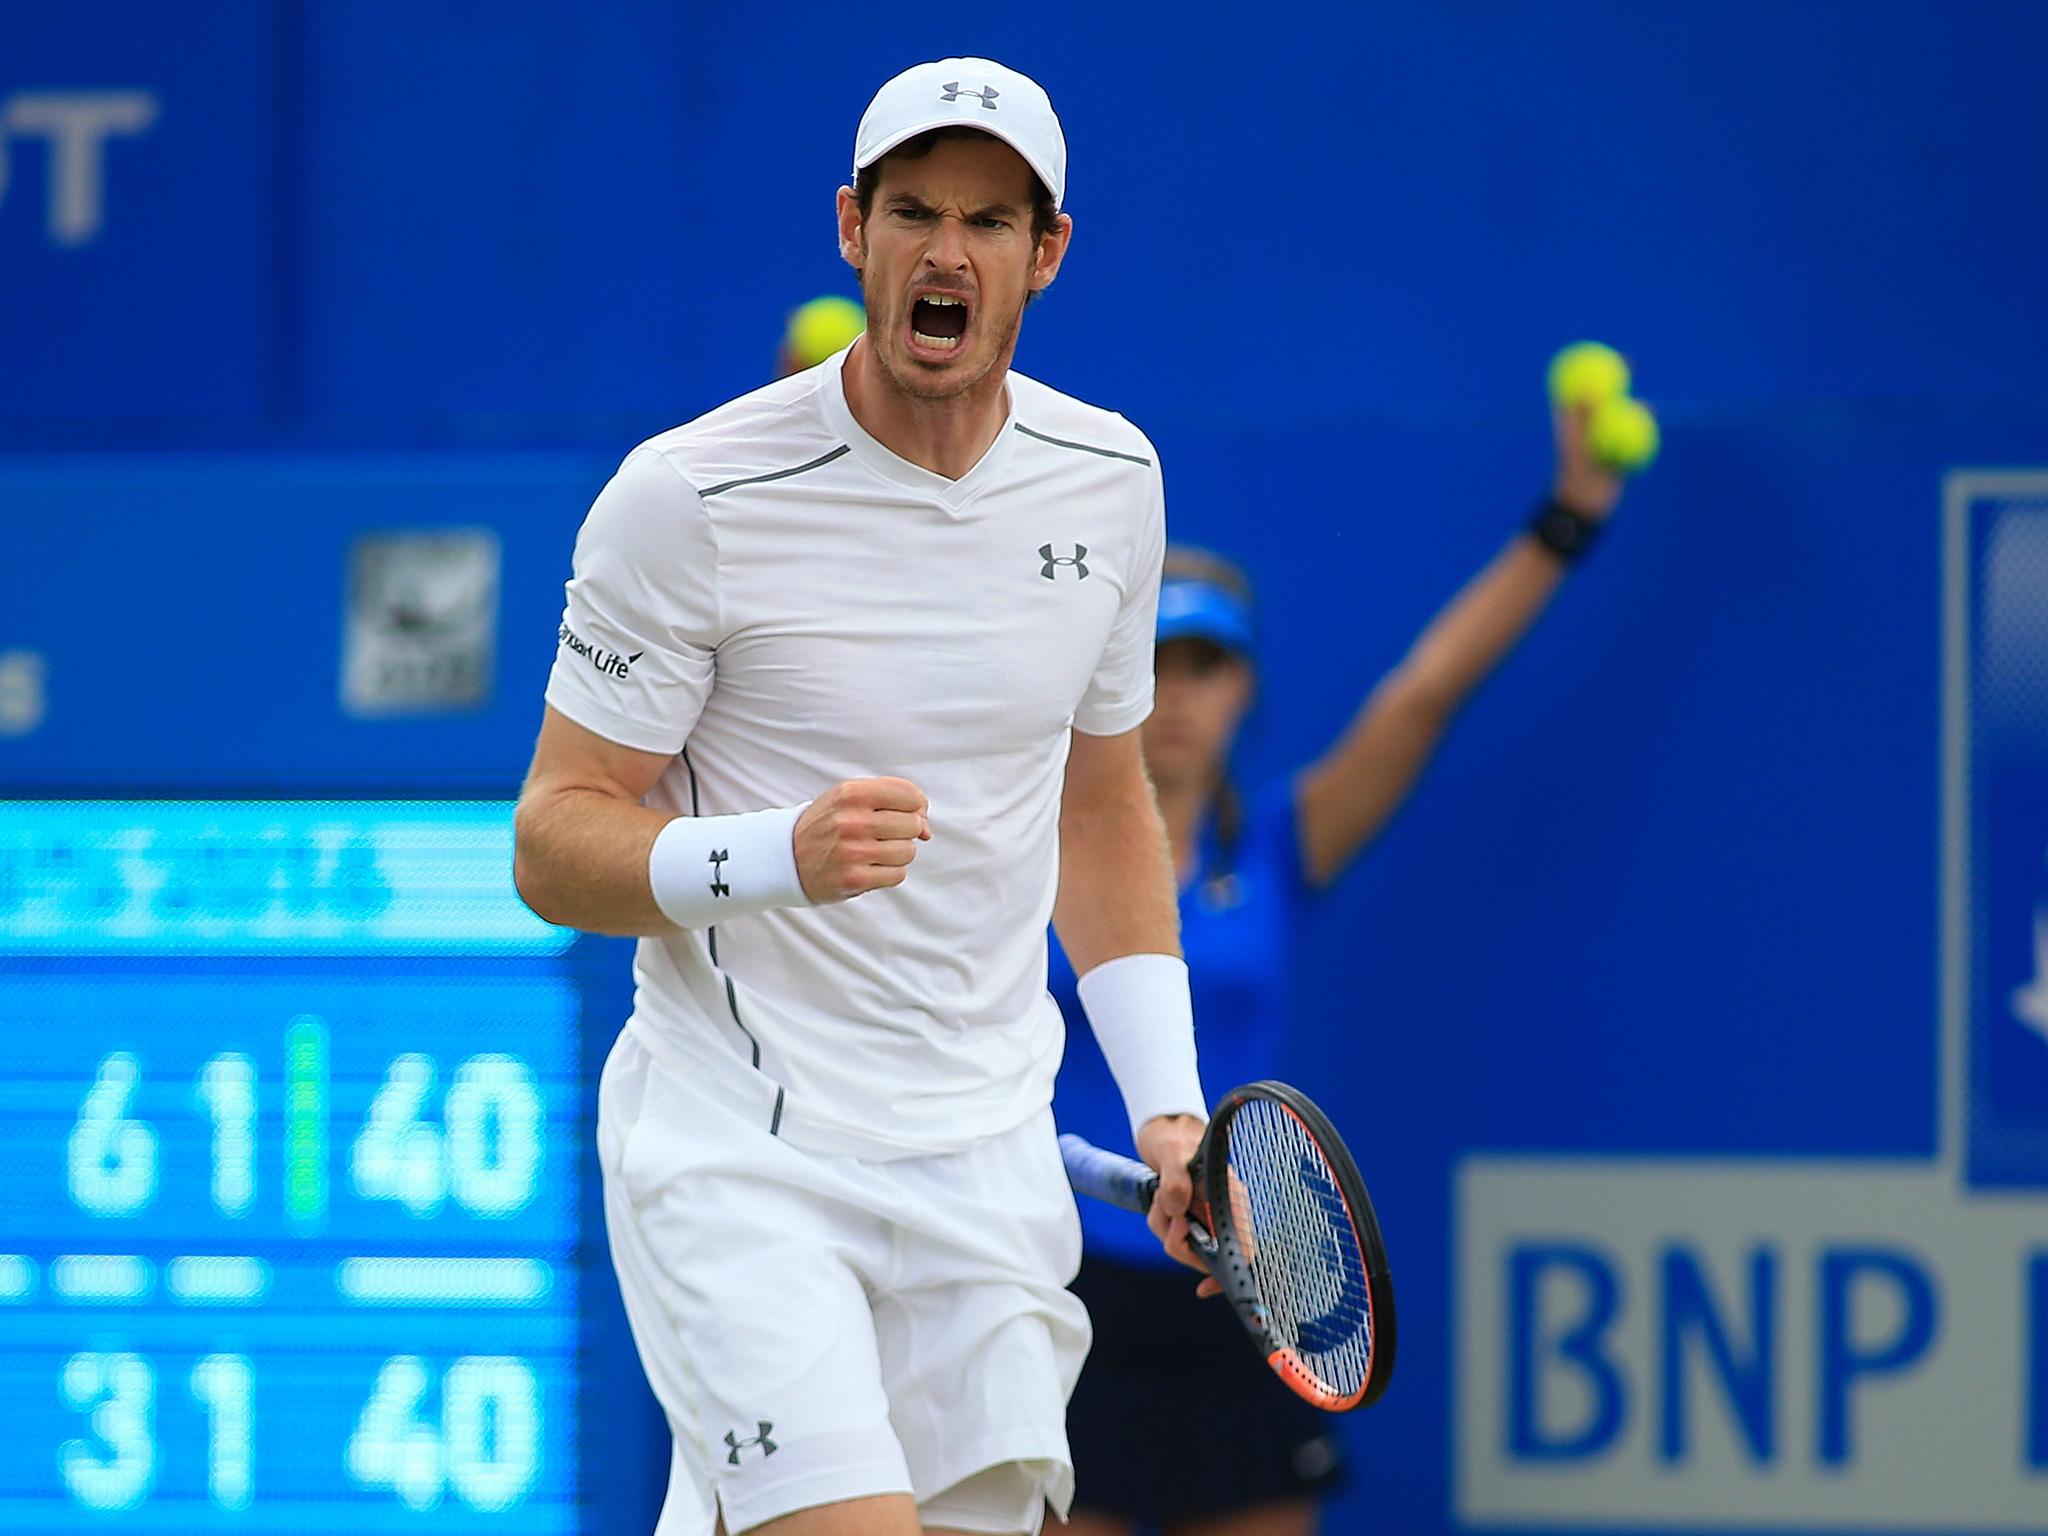 Murray has played in four previous Queen's finals and won them all